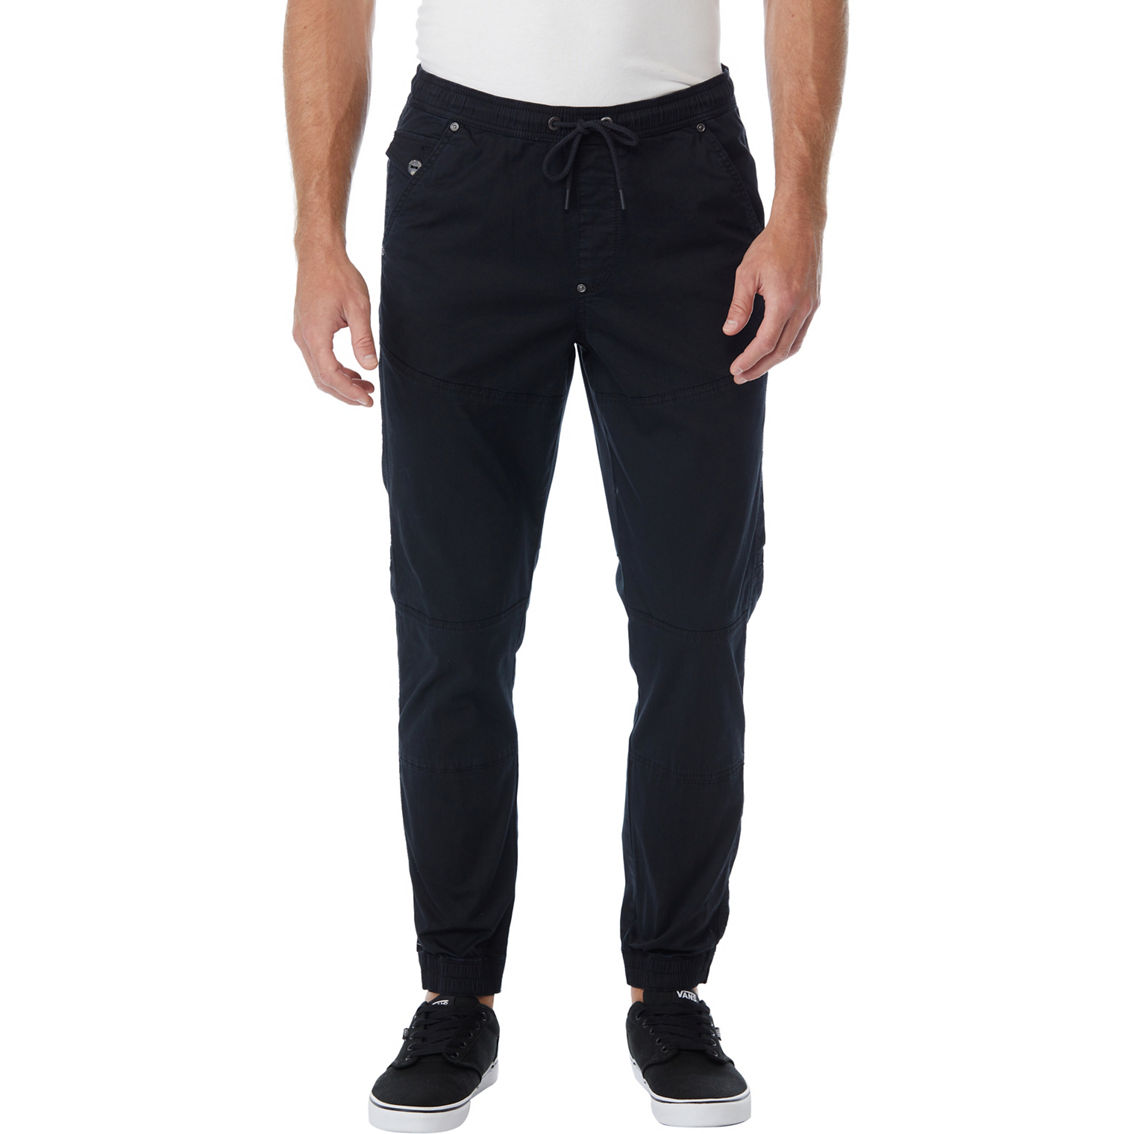 Unionbay Charger Joggers | Pants | Clothing & Accessories | Shop The ...